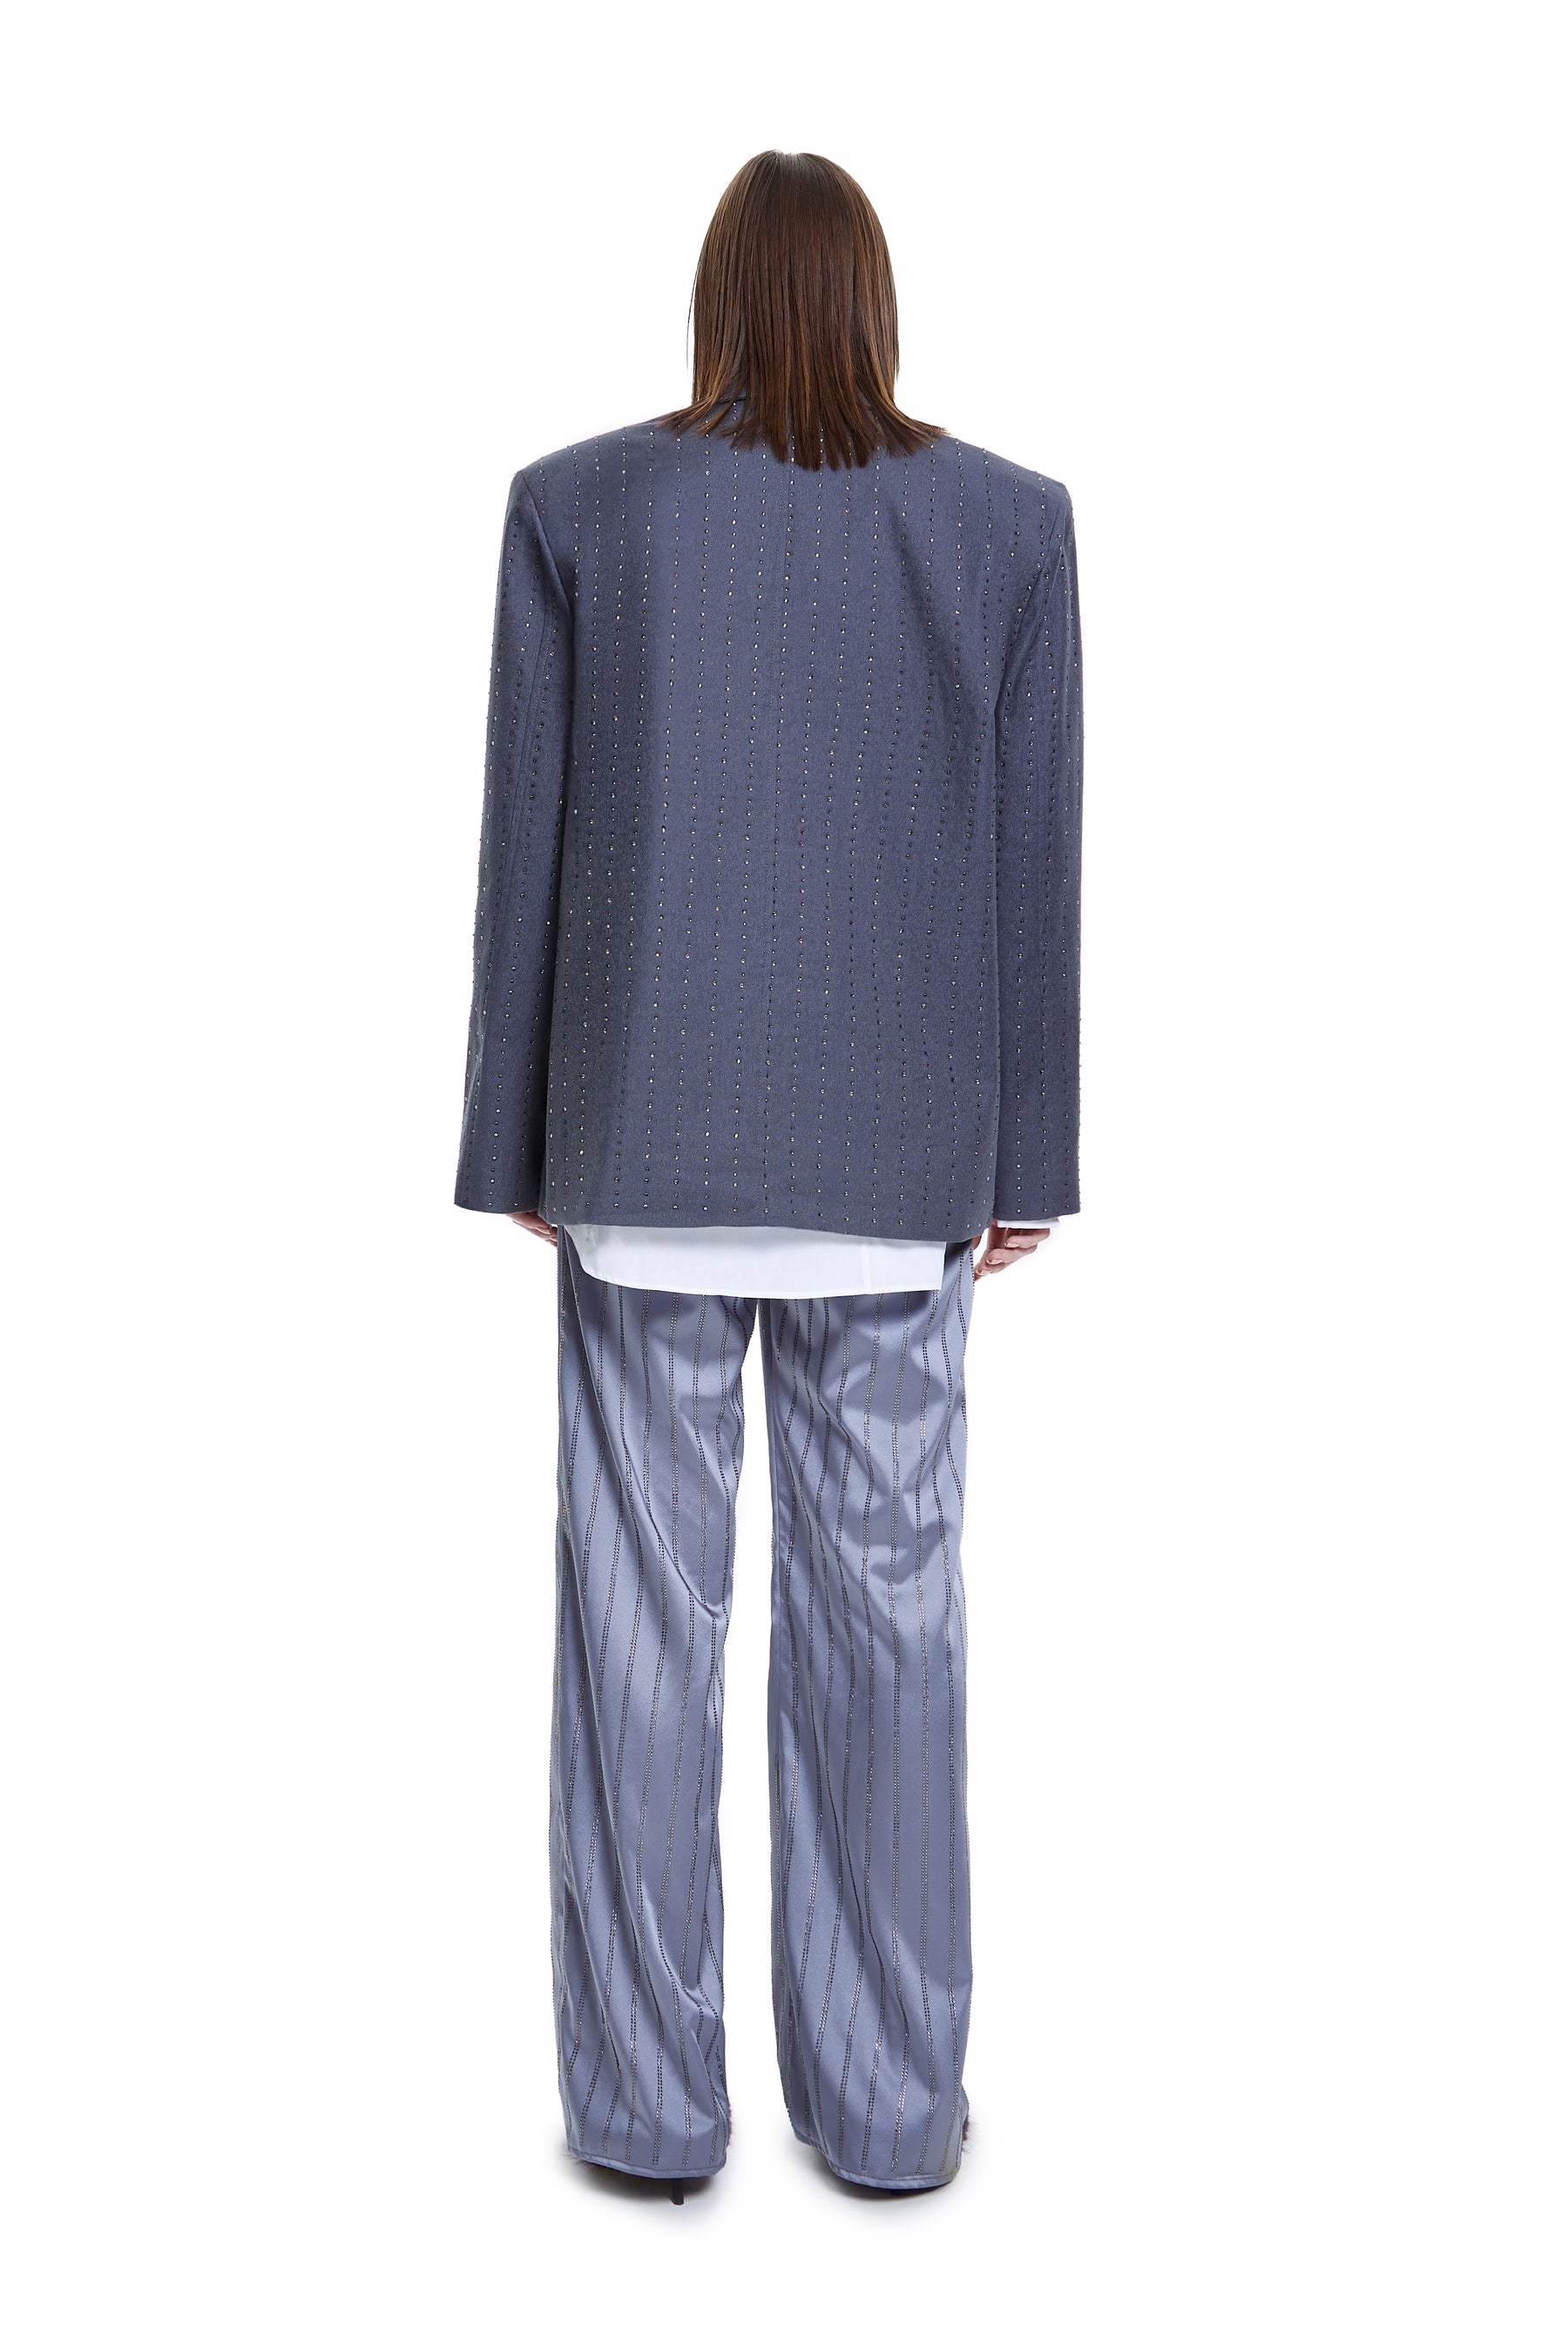 Luminescent Pant in Gray